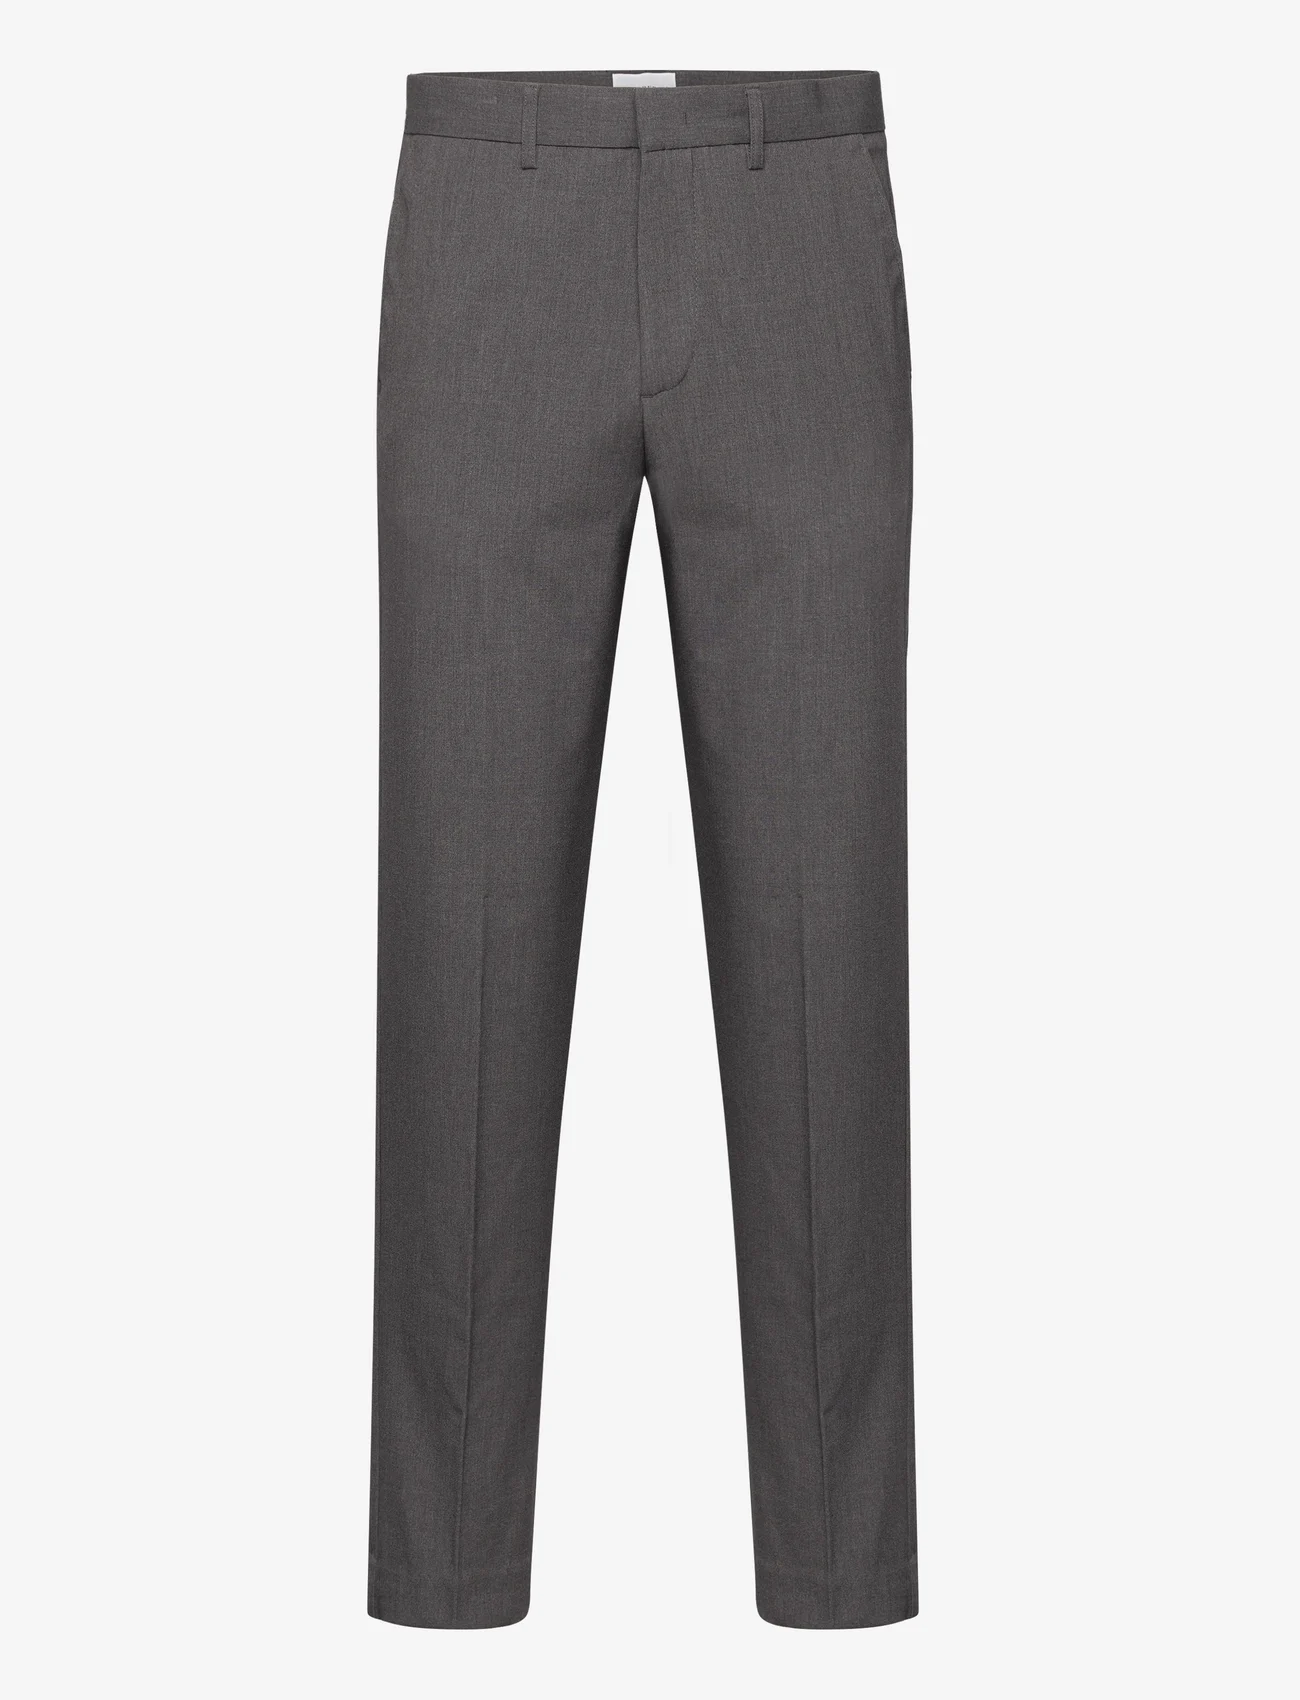 Lindbergh - Relaxed fit formal pants - kostymbyxor - grey mix - 0